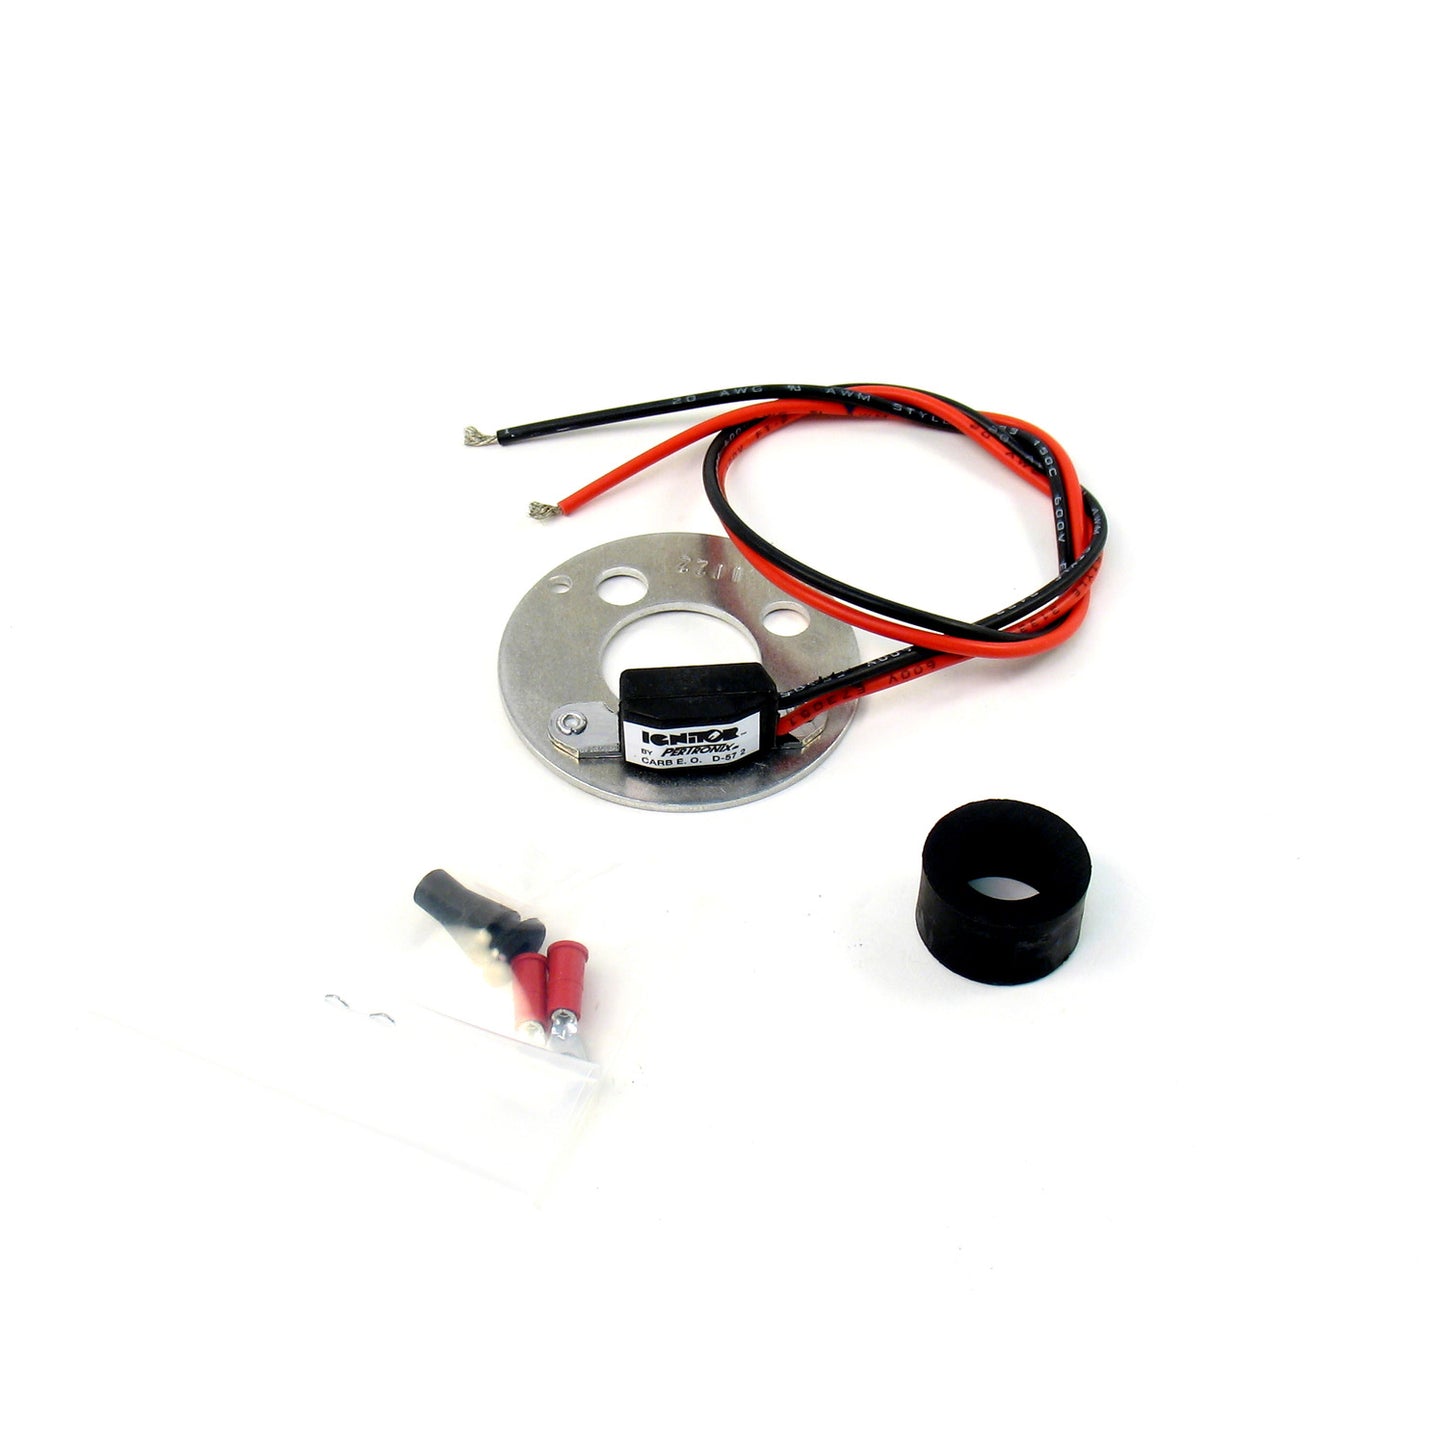 PerTronix Ignitor Electronic Ignition Conversion Kit for Delco Distributors-1122-closeup